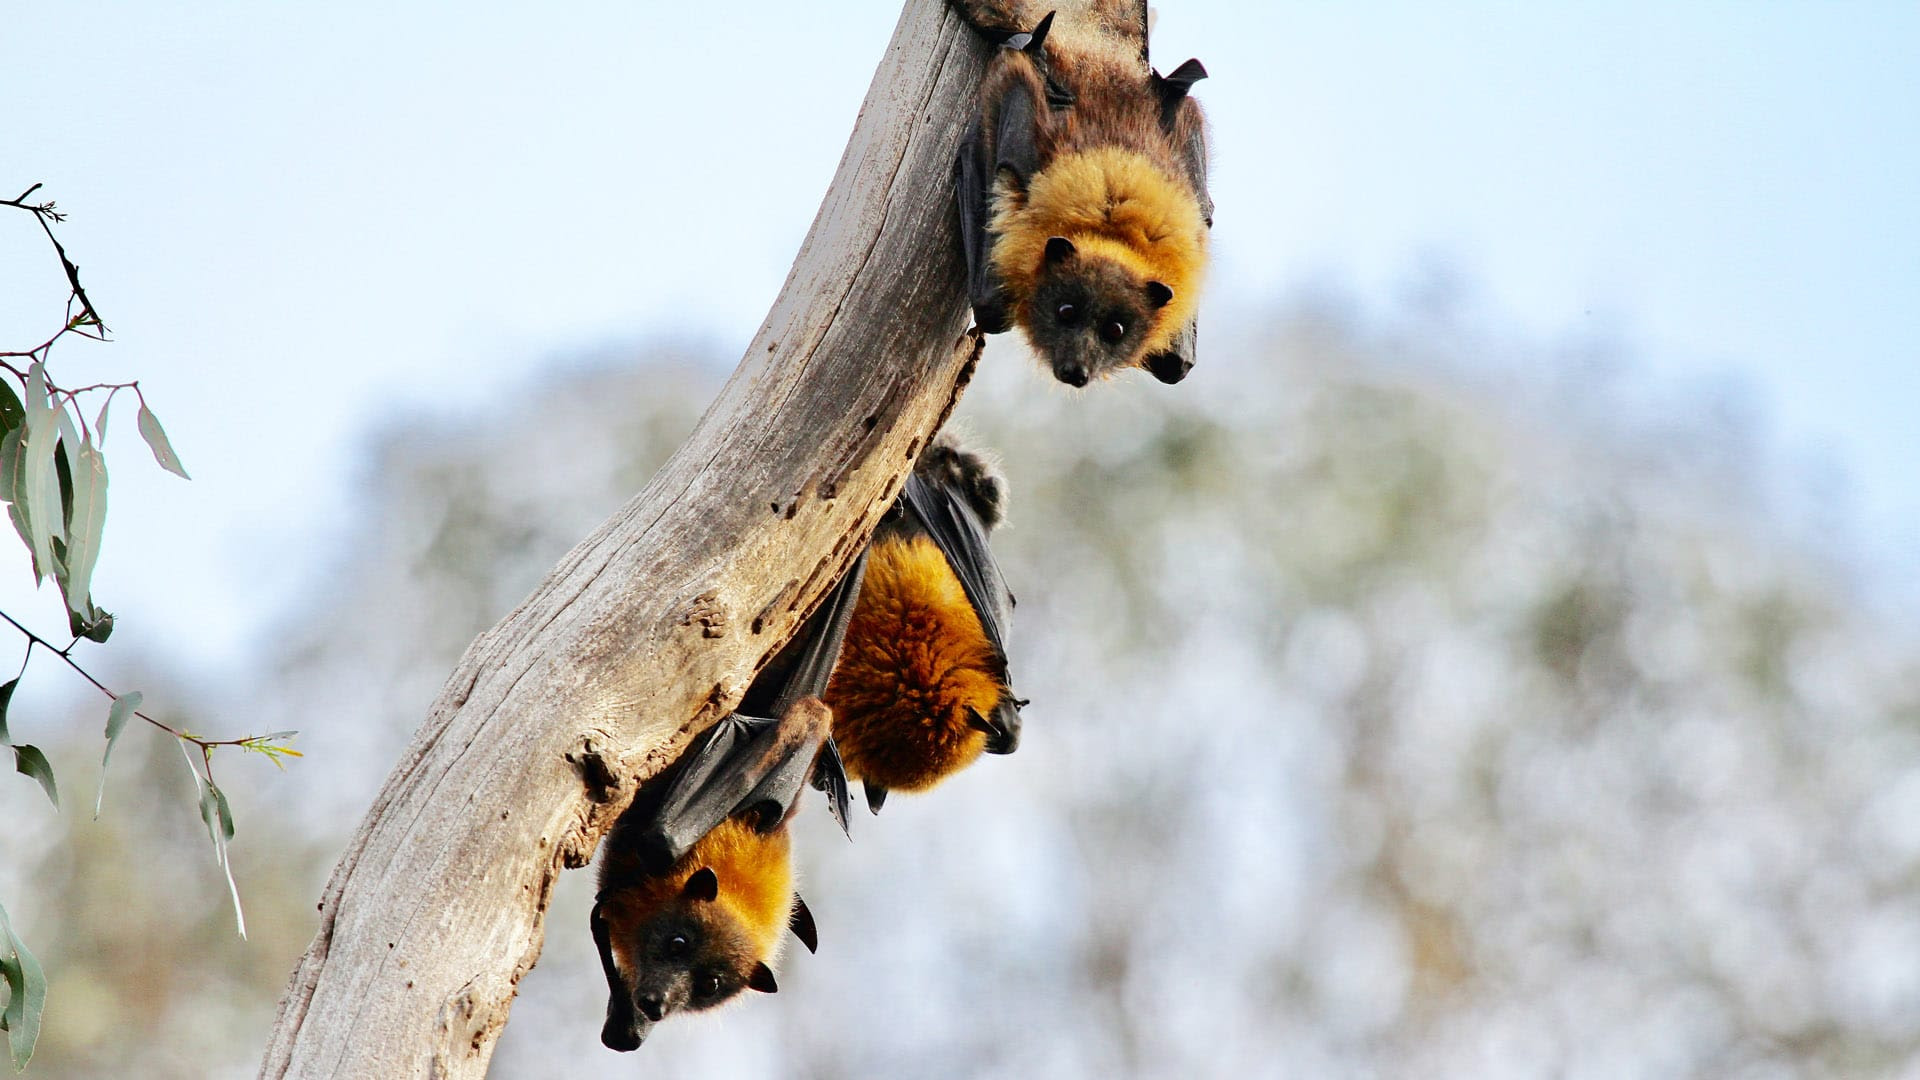 Covid-19 Reignites a Contentious Debate Over Bats and Disease